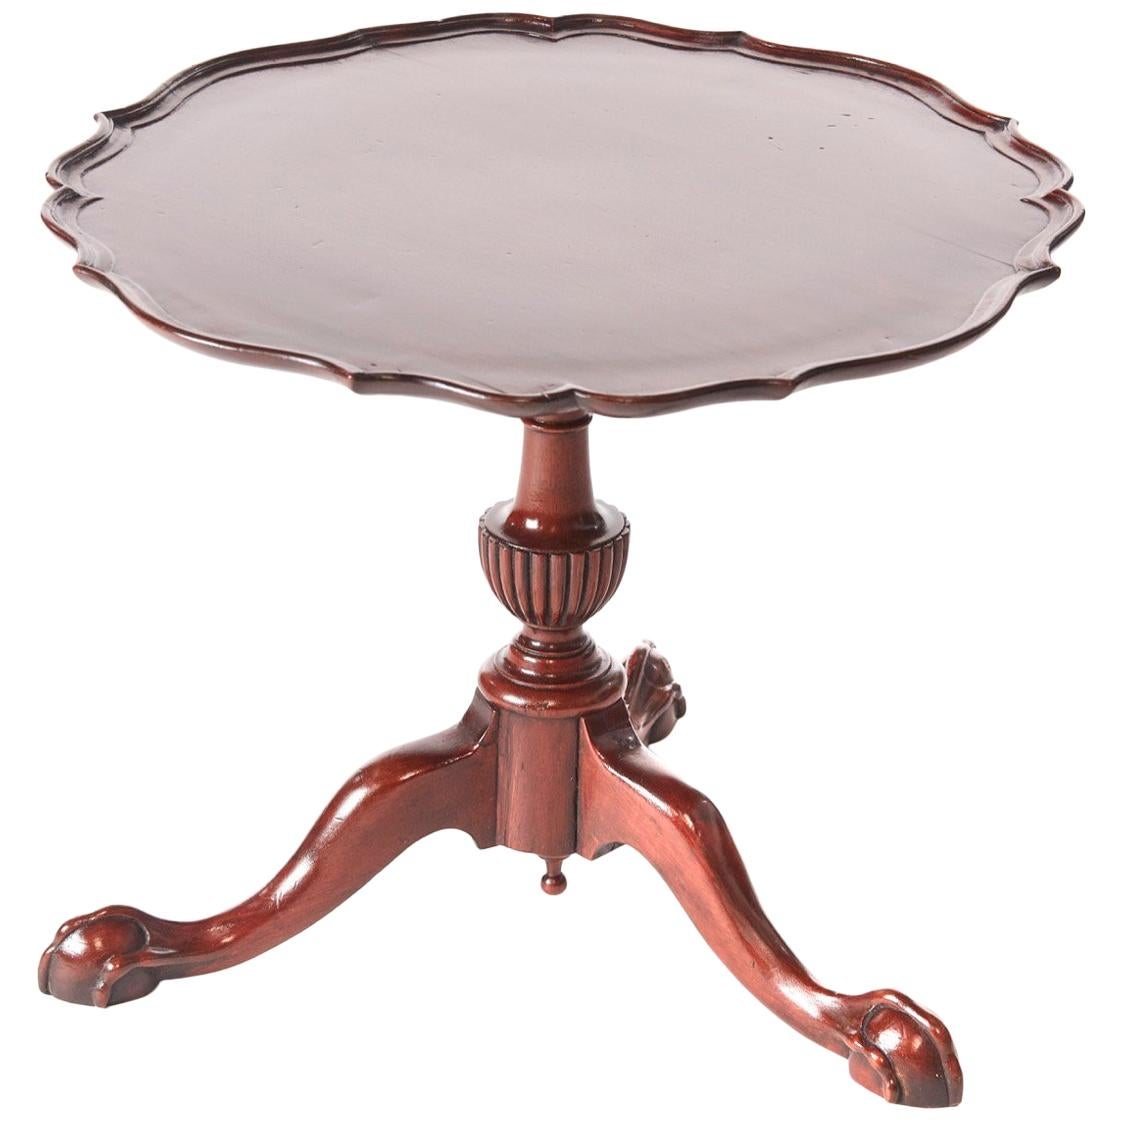 Mahogany Pie Crust Shaped Top Lamp Table For Sale